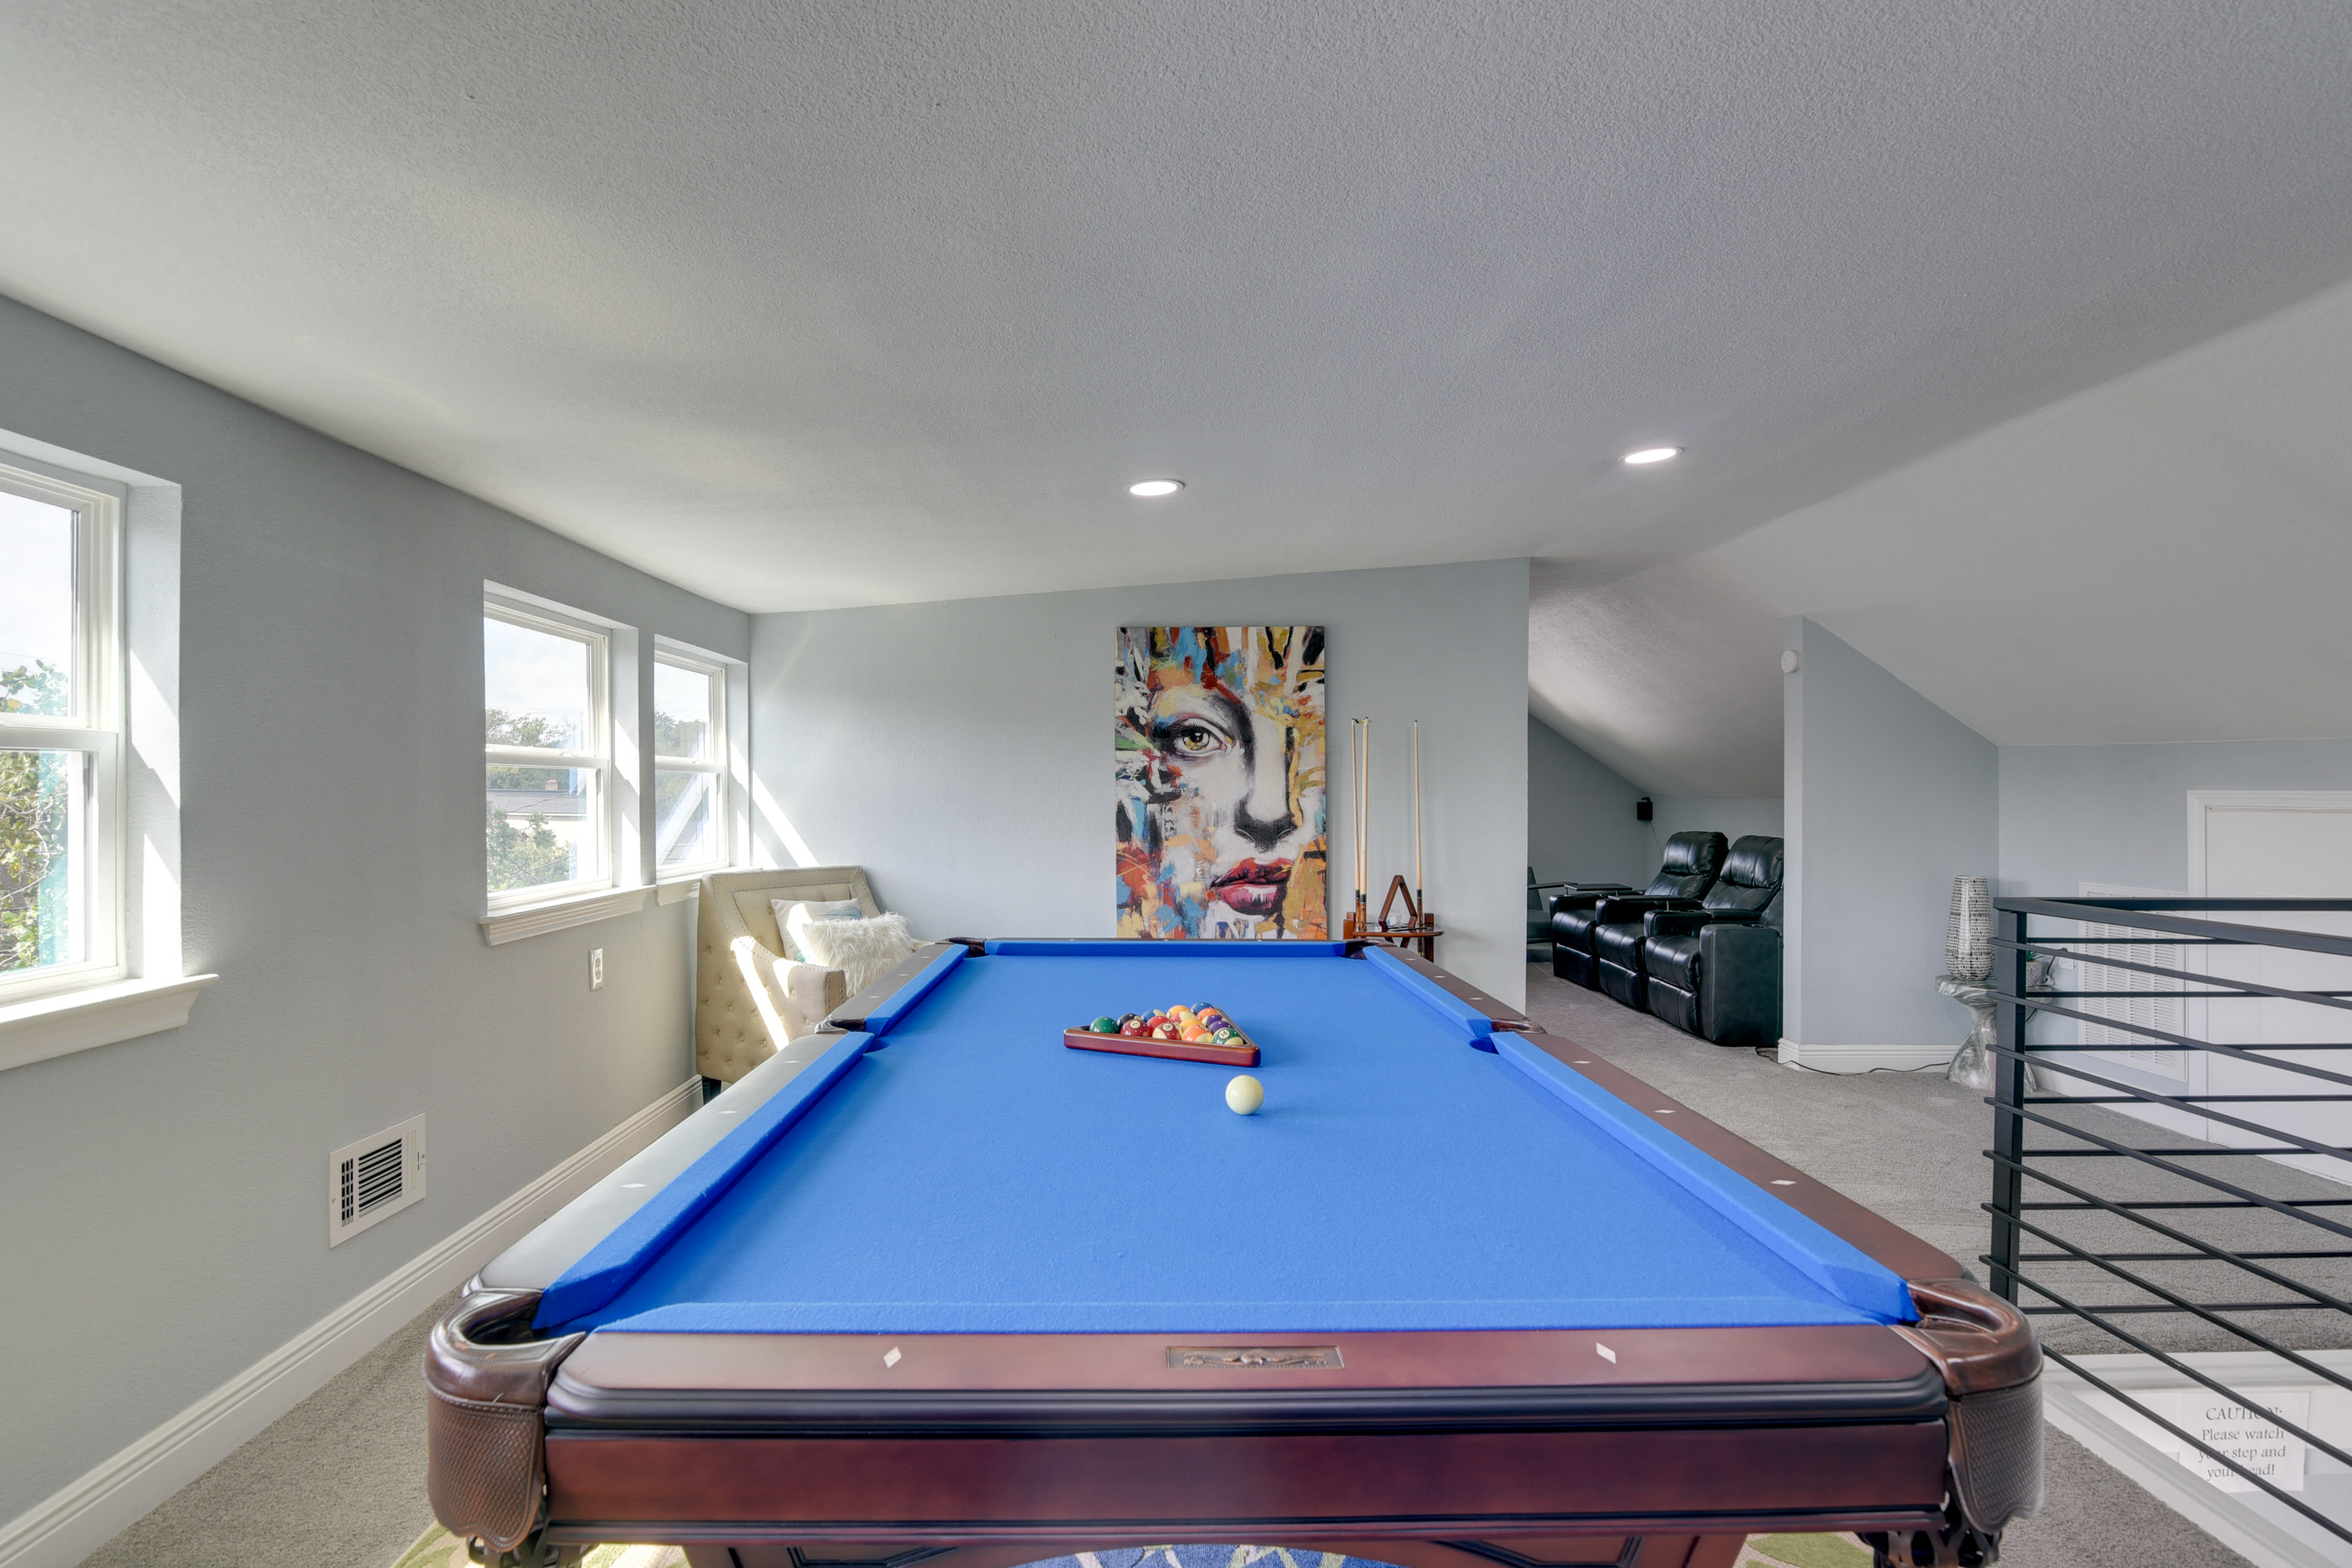 Loft | Pool Table | 2 Living Areas | Central Air Conditioning/Heat